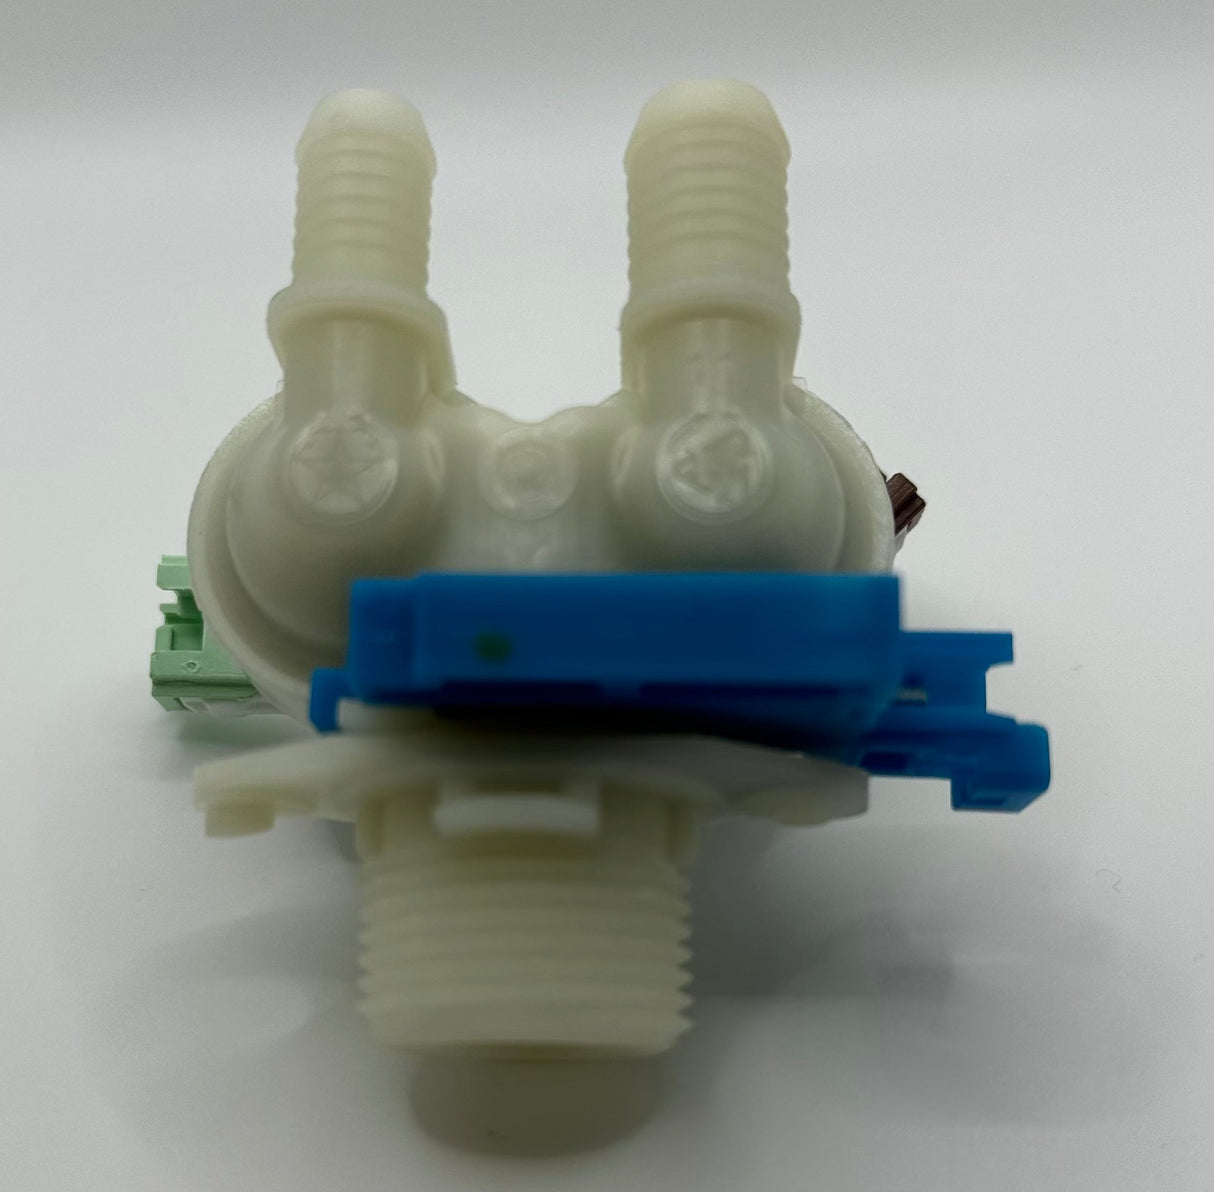 Electrolux Solenoid Valve (2 Way) 1325186227 - My Oven Spares-Electrolux-1325186227-4